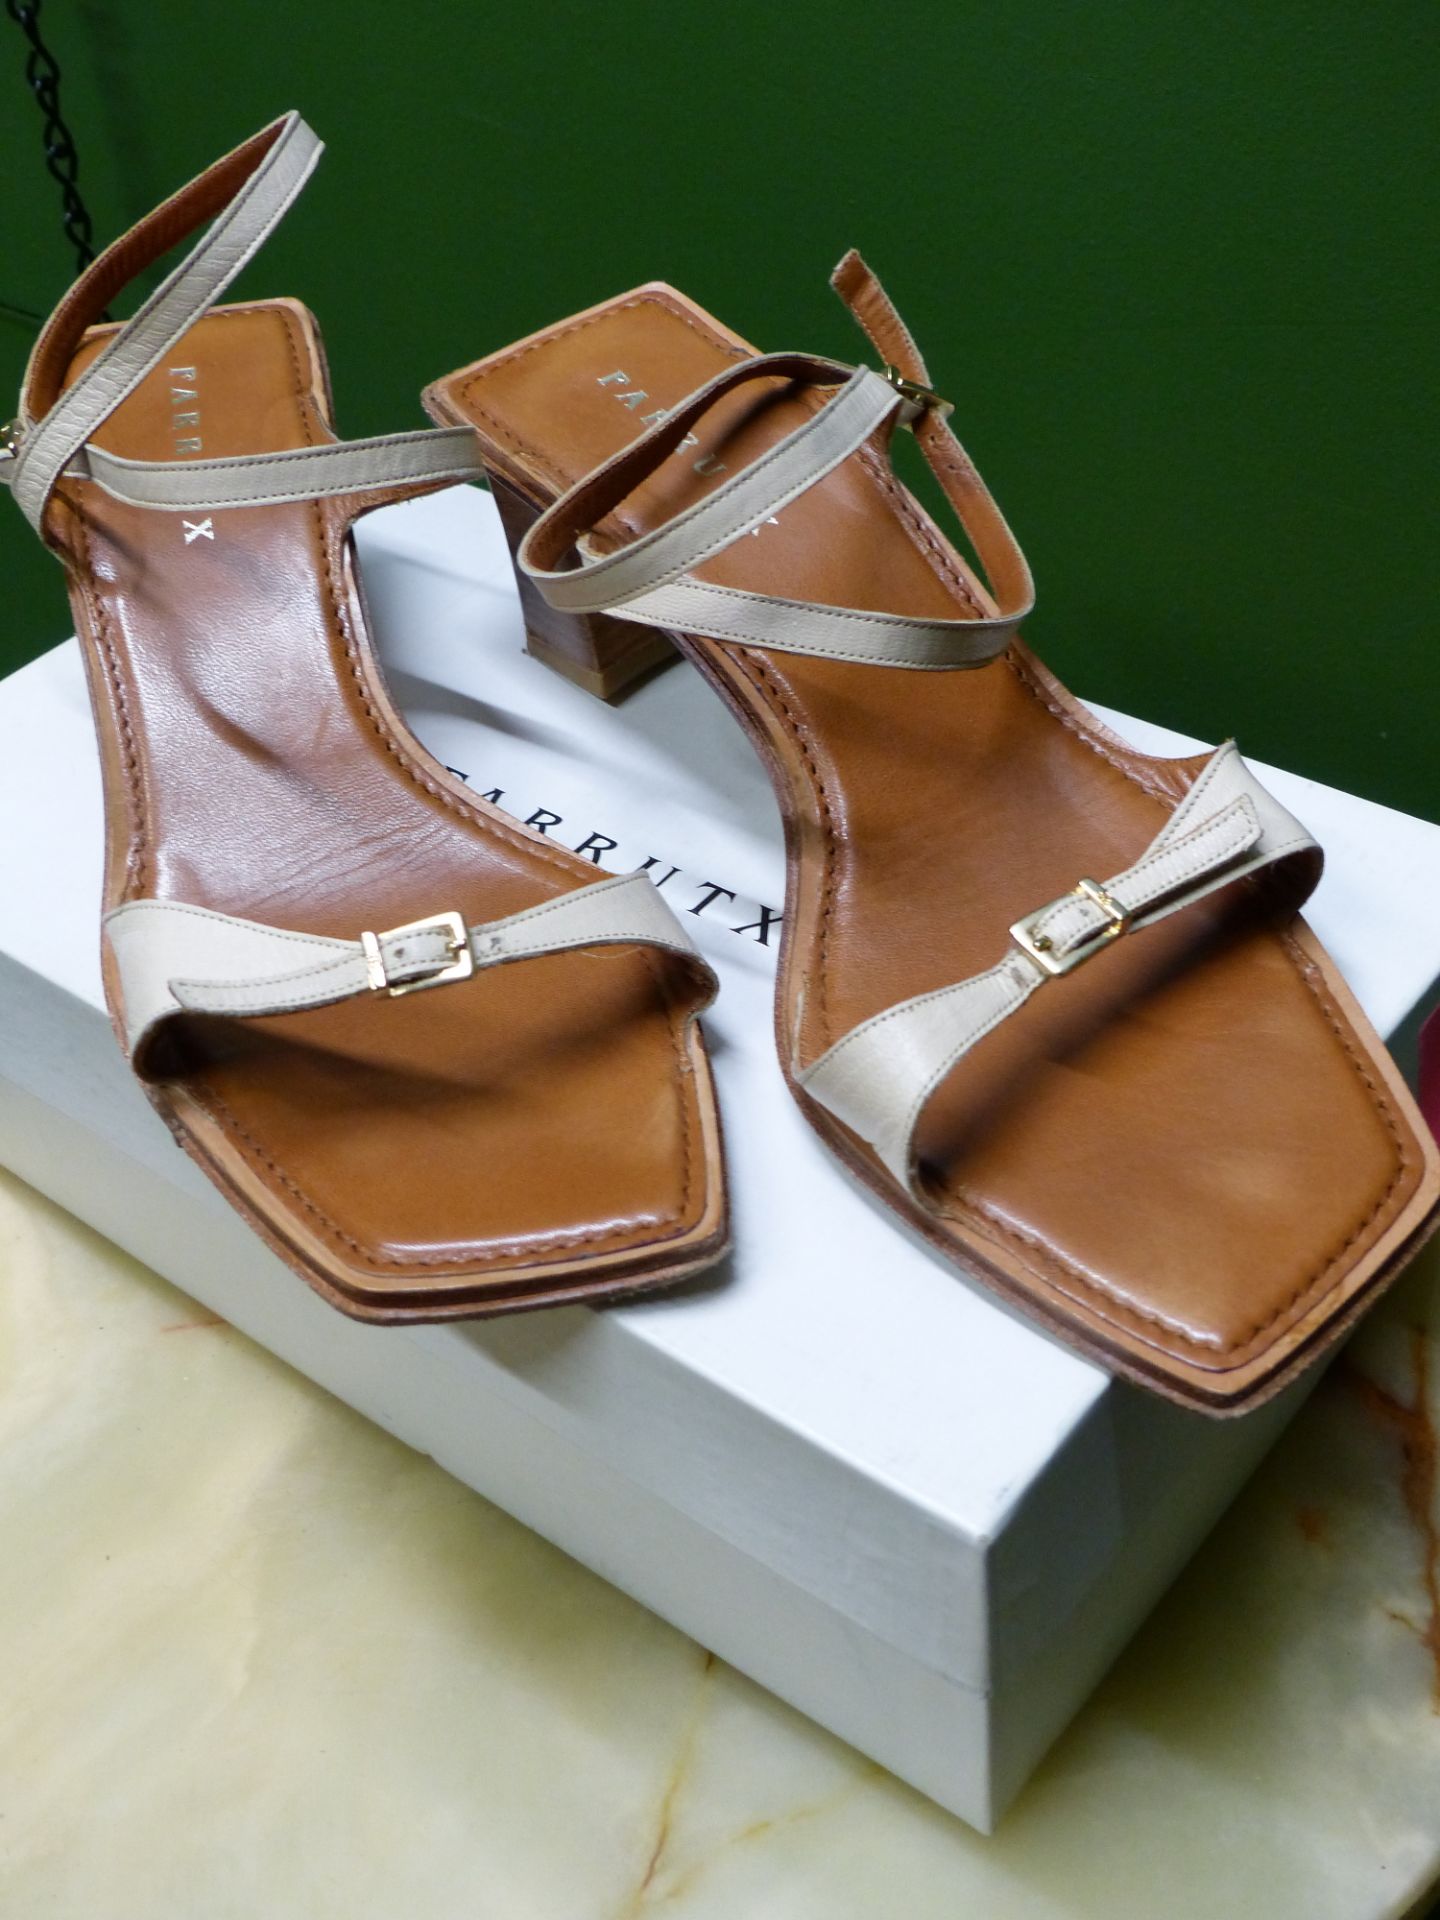 SHOES. FARRUTX SPANISH BEIGE LEATHER BUCKLED HEALED SANDAL EUR 40 HEAL HEIGHT 5cm - Image 5 of 5